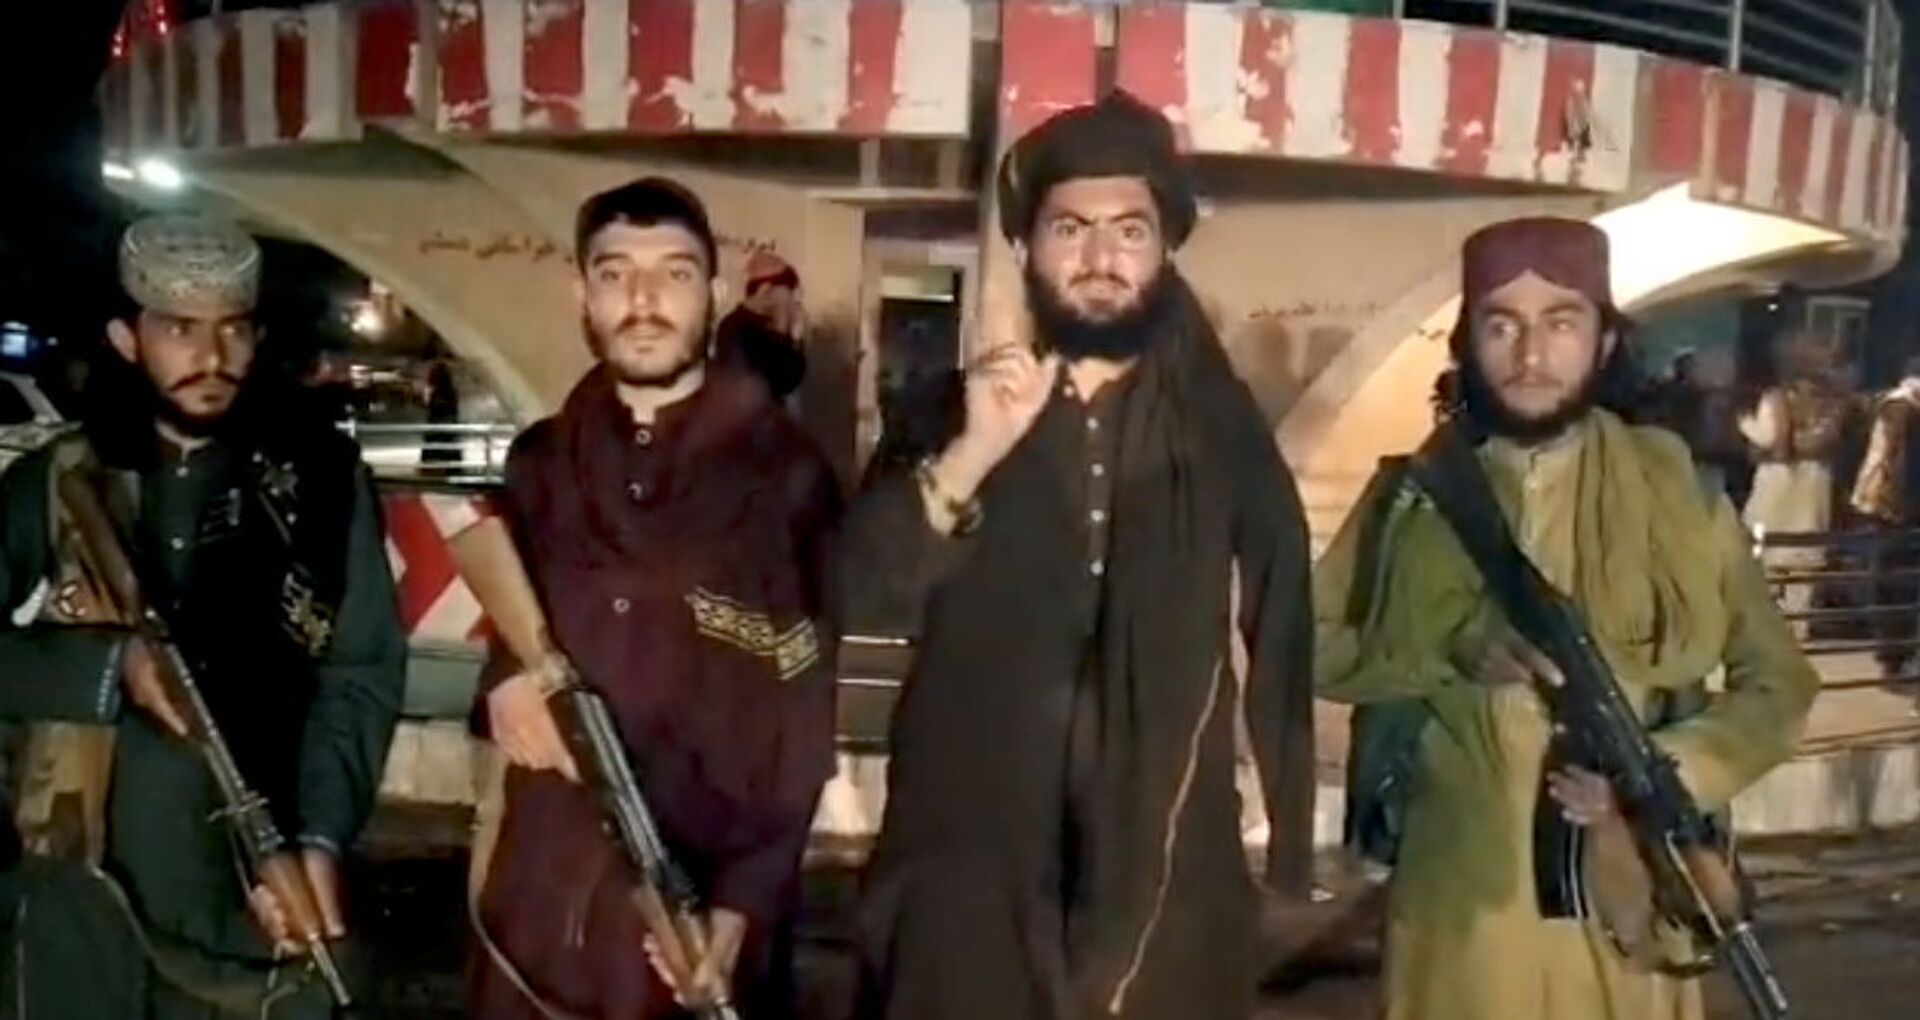 Taliban fighters record a message after seizing Pul-e- Khumri, capital of Baghlan province, Afghanistan, in this still image taken from a social media video, uploaded August 10, 2021 - Sputnik International, 1920, 07.09.2021